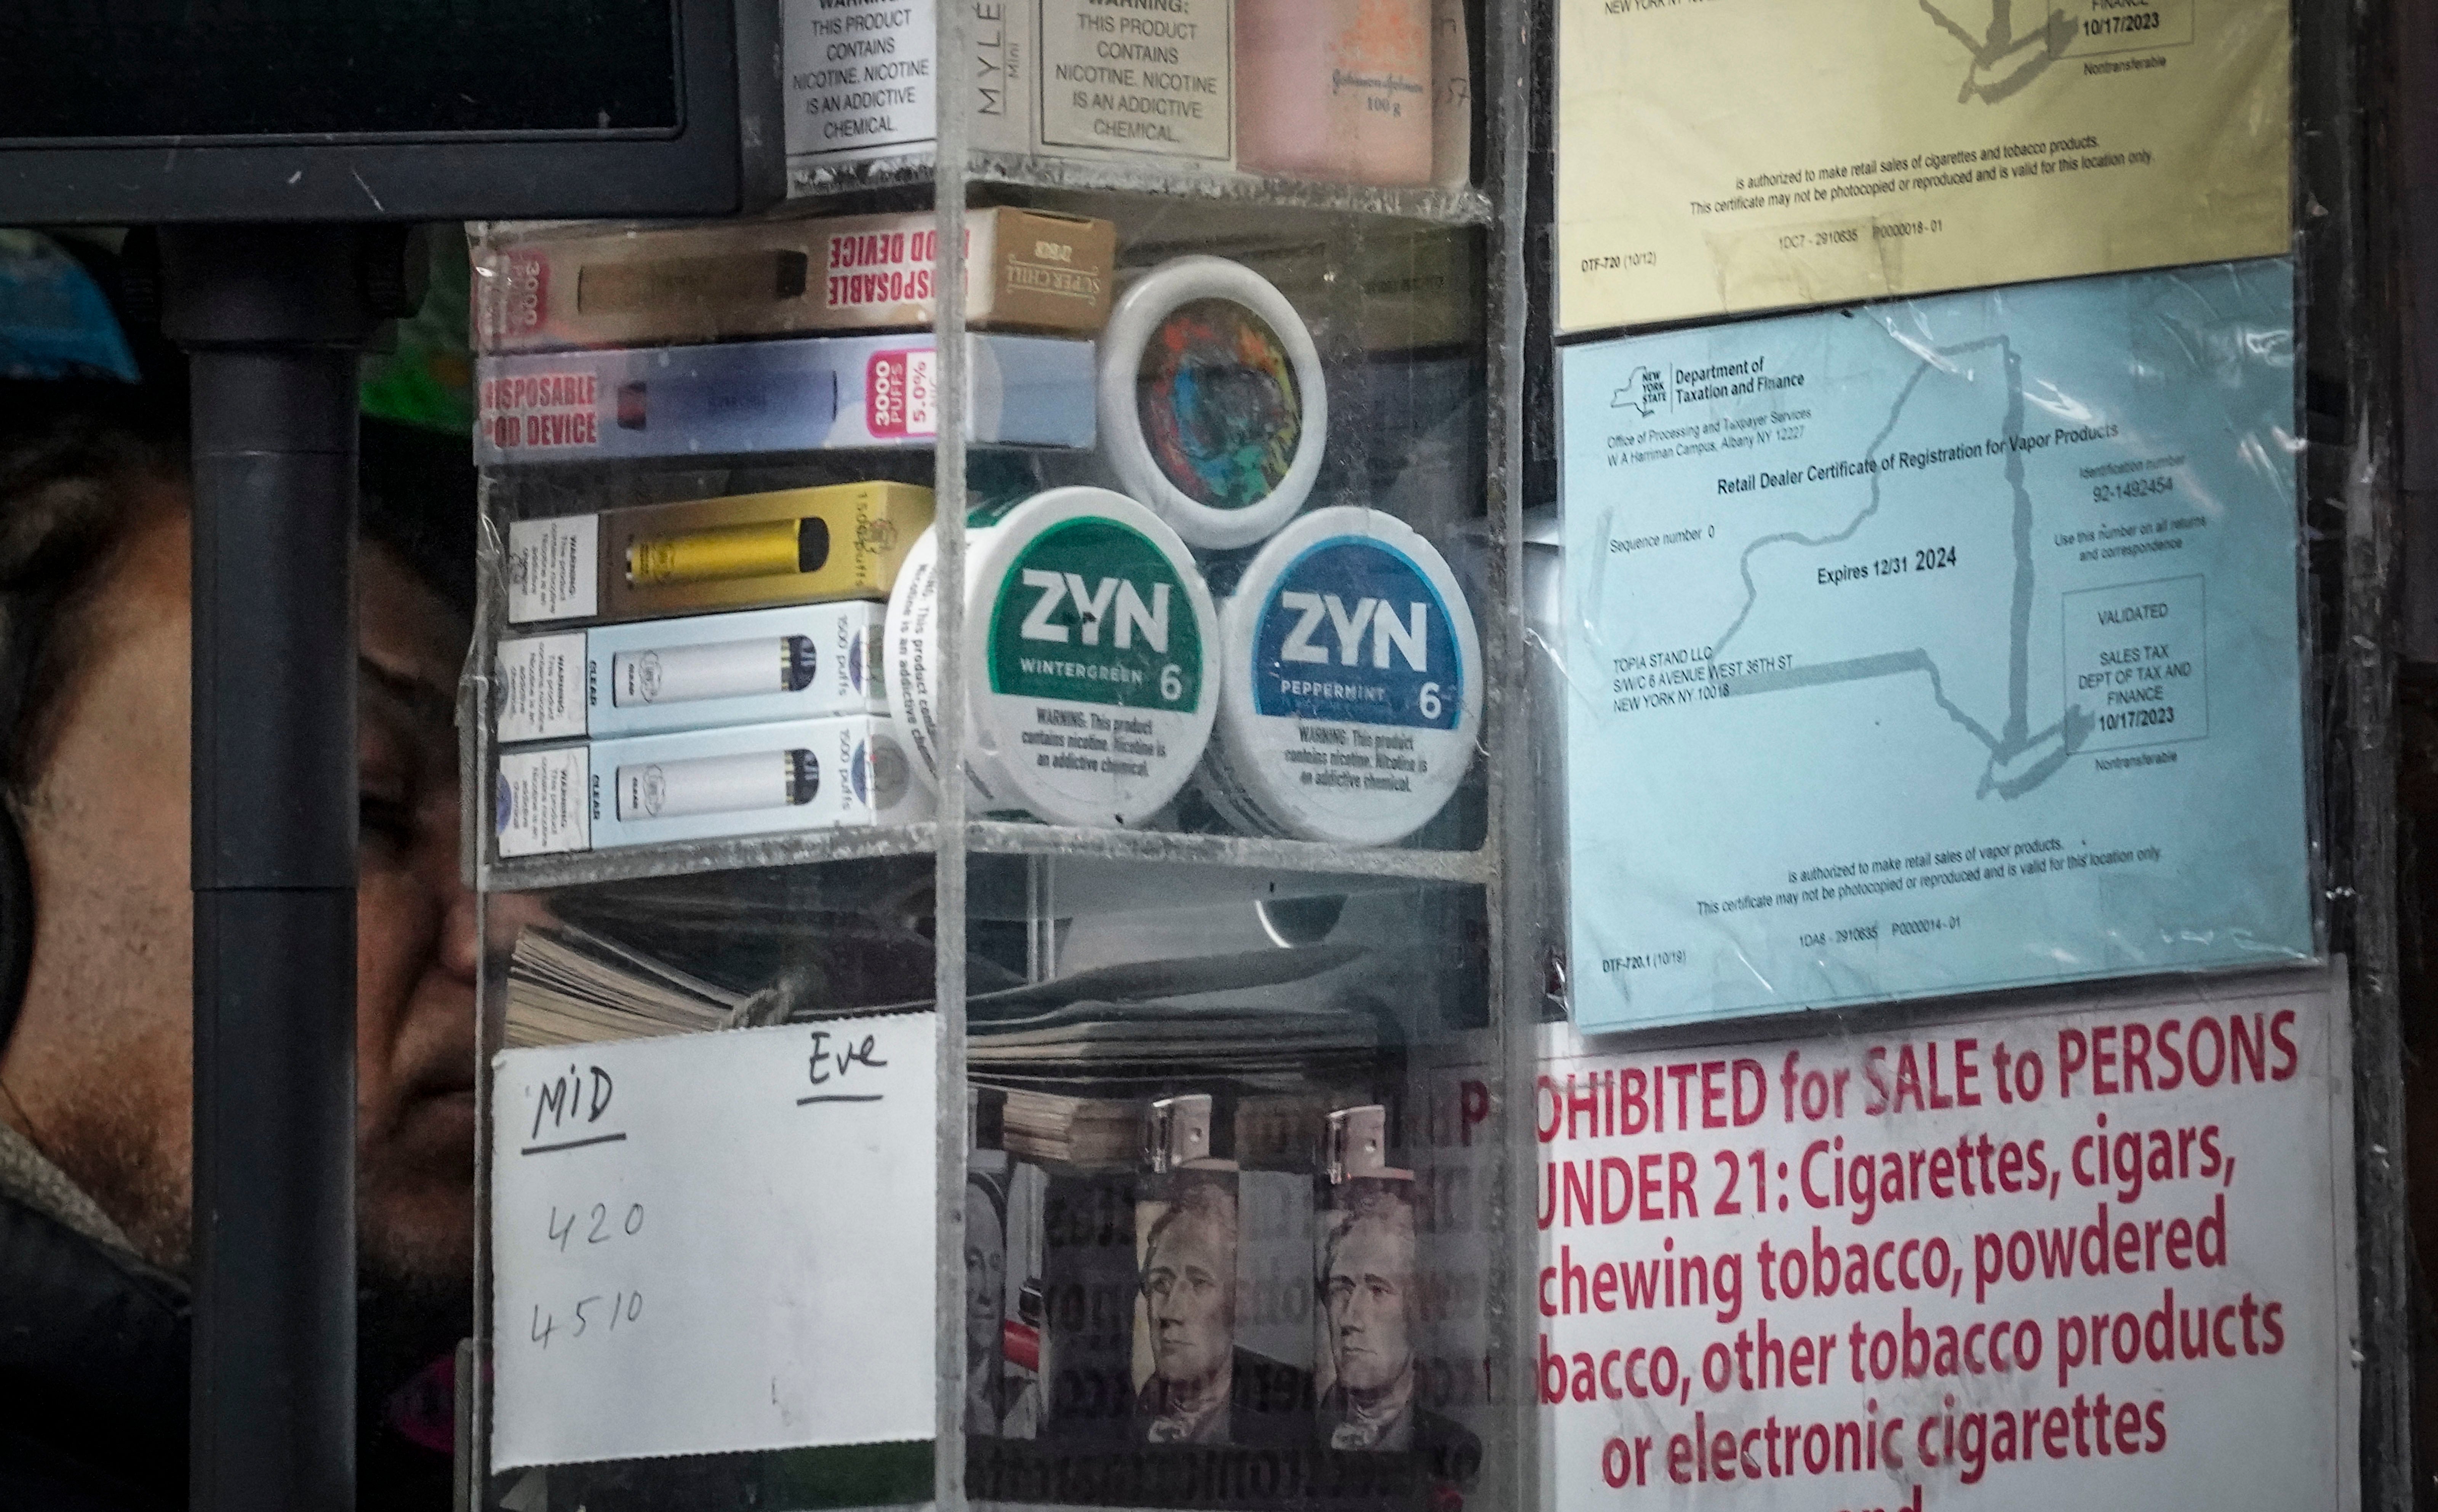 Containers of Zyn, a Phillip Morris smokeless nicotine pouch, is stacked for sale at a newsstand in New York